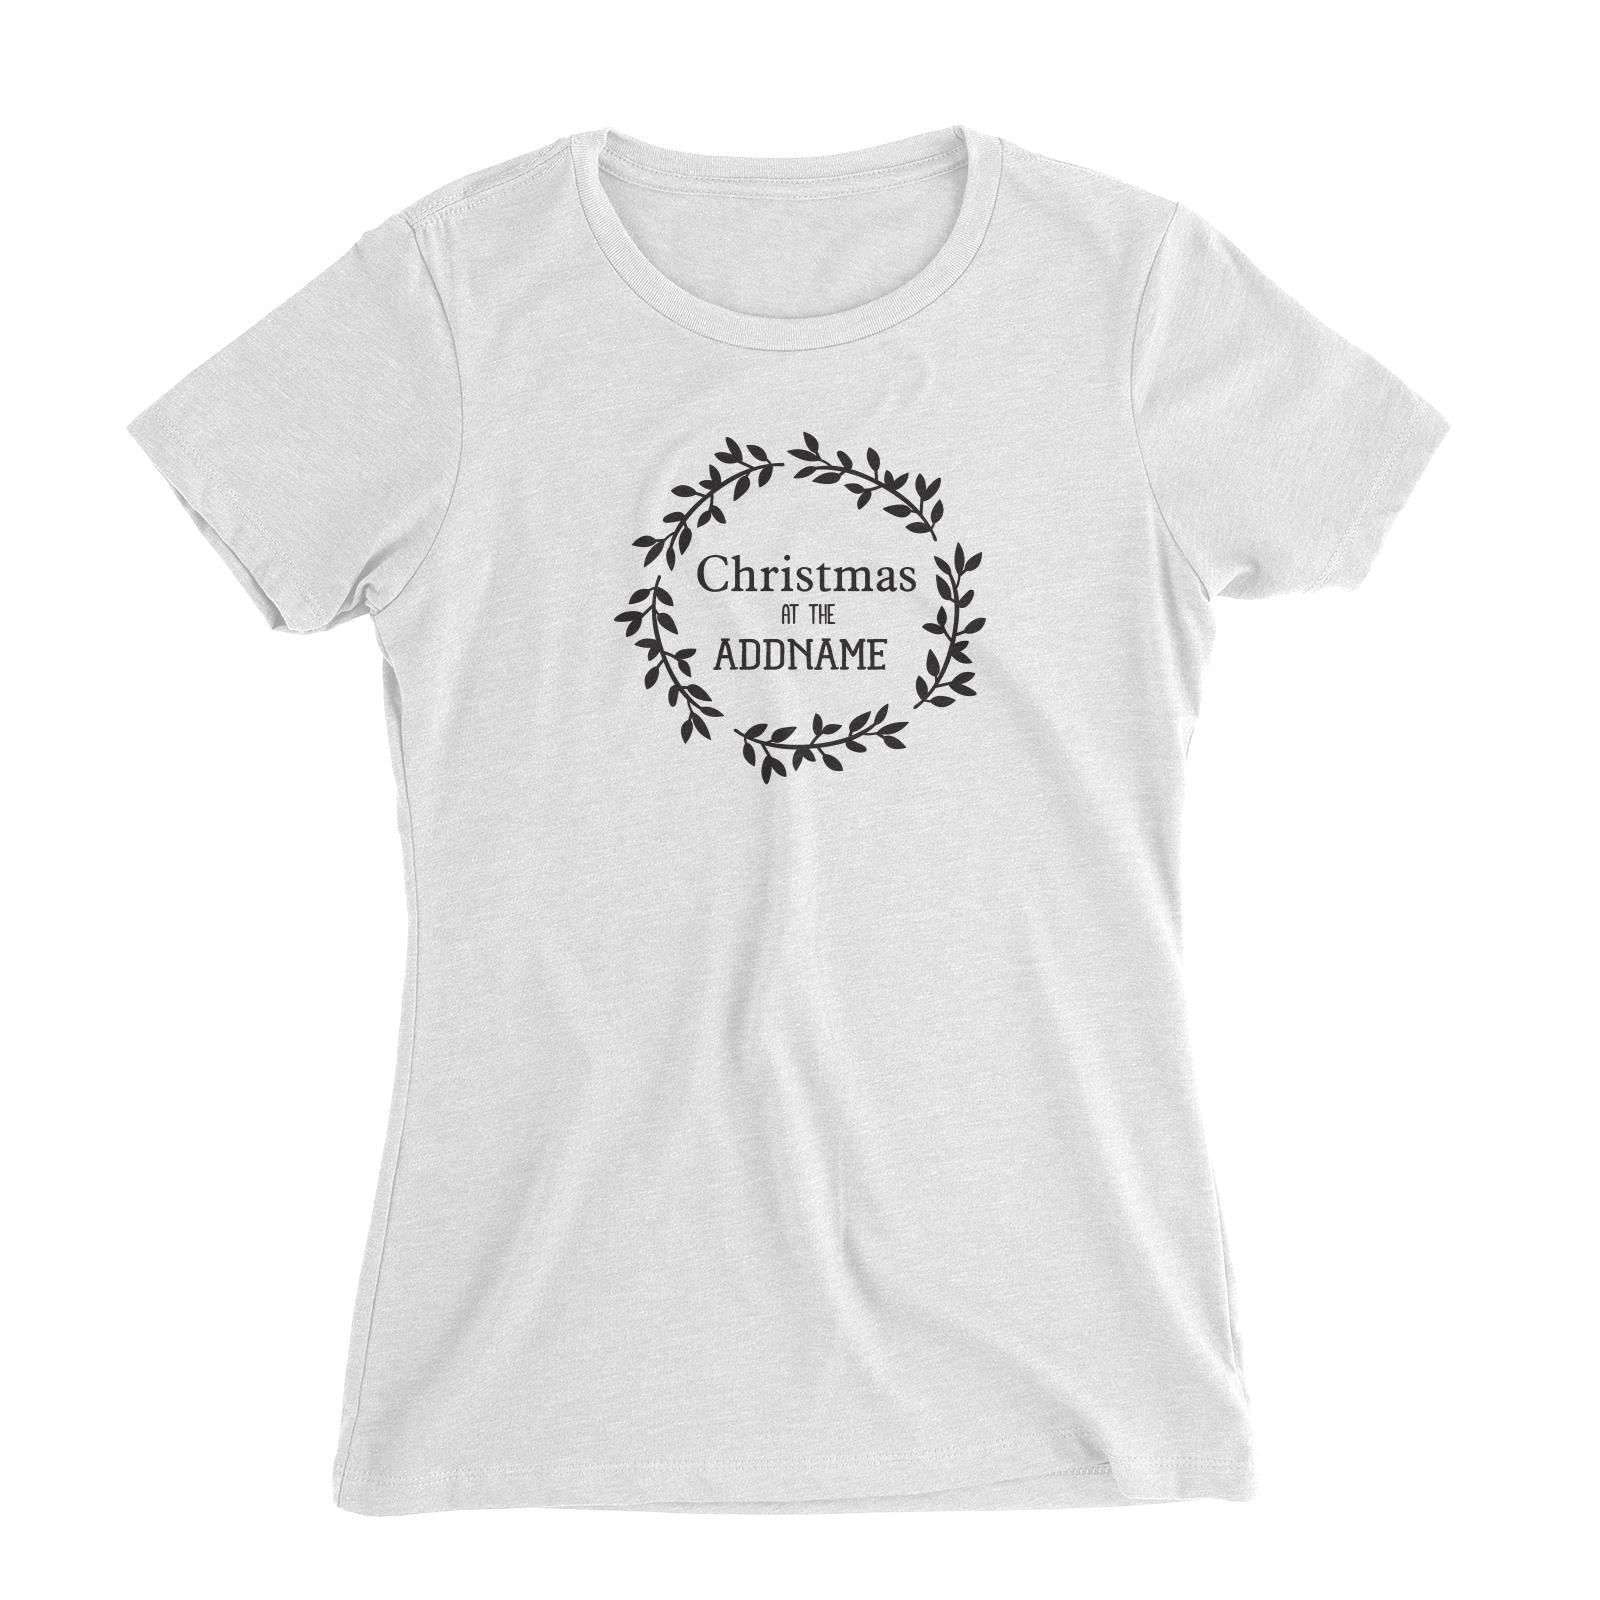 Xmas Christmas At The Flower Wreath Women's Slim Fit T-Shirt